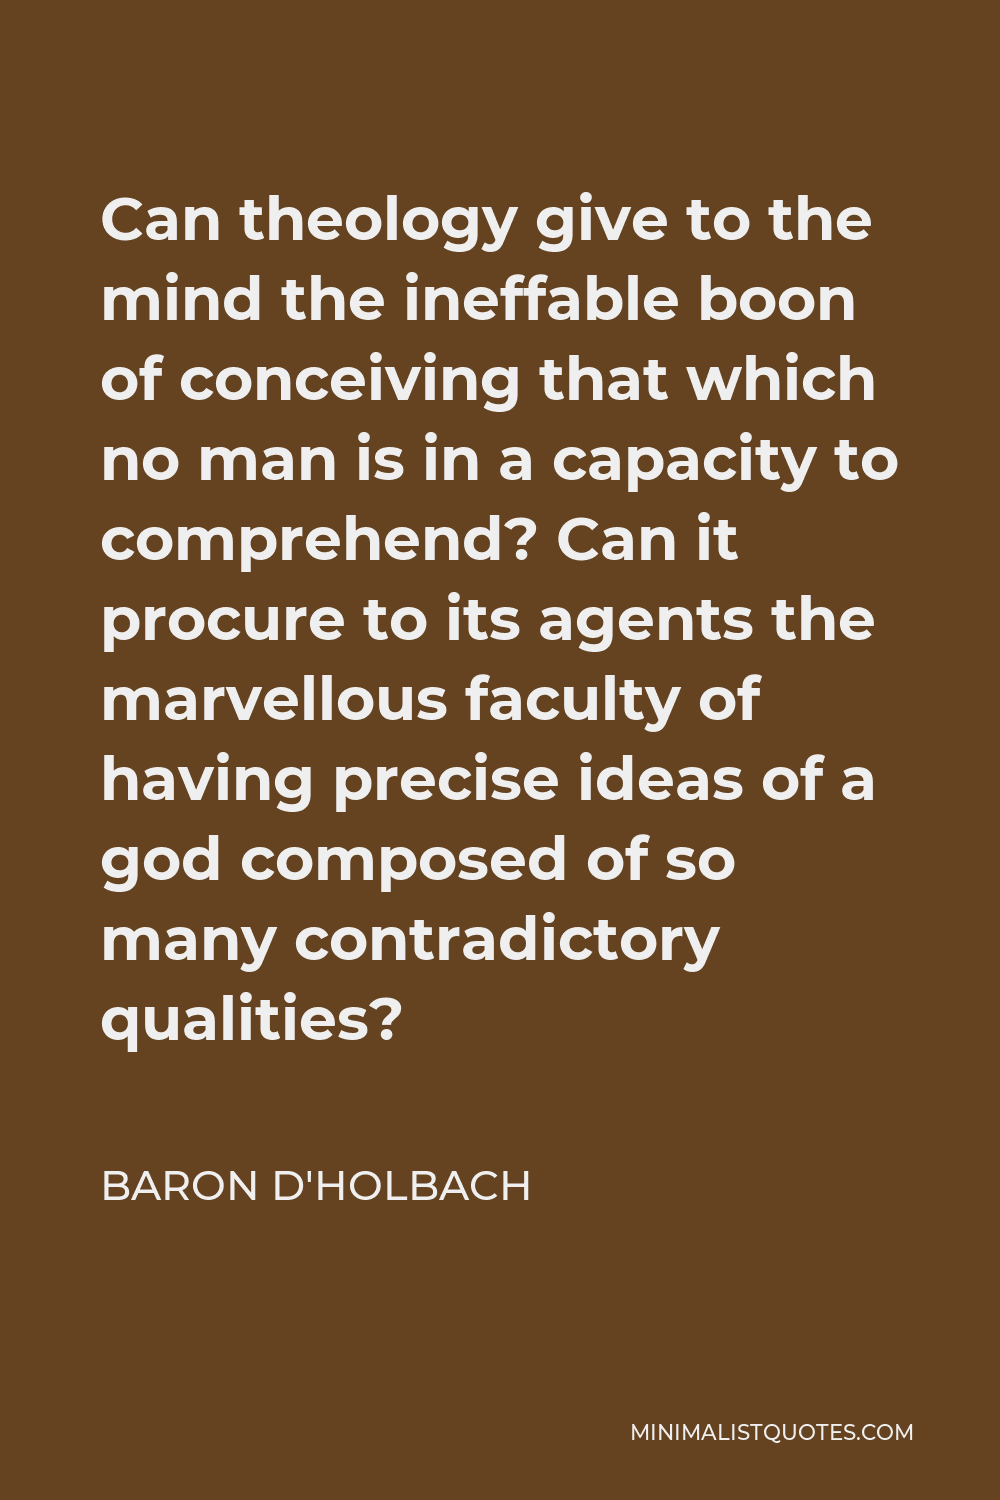 Baron d'Holbach Quote - Can theology give to the mind the ineffable boon of conceiving that which no man is in a capacity to comprehend? Can it procure to its agents the marvellous faculty of having precise ideas of a god composed of so many contradictory qualities?